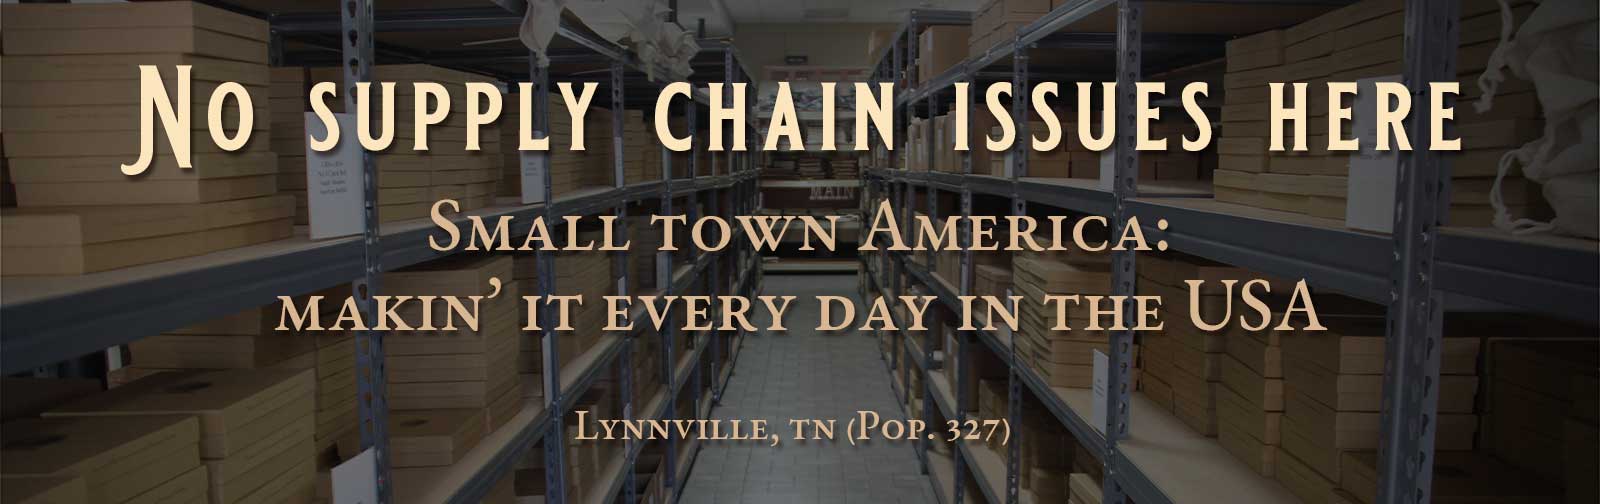 No supply chain issues here. Small Town America: Makin' it every day in the USA. Lynnville, TN (Pop. 327)